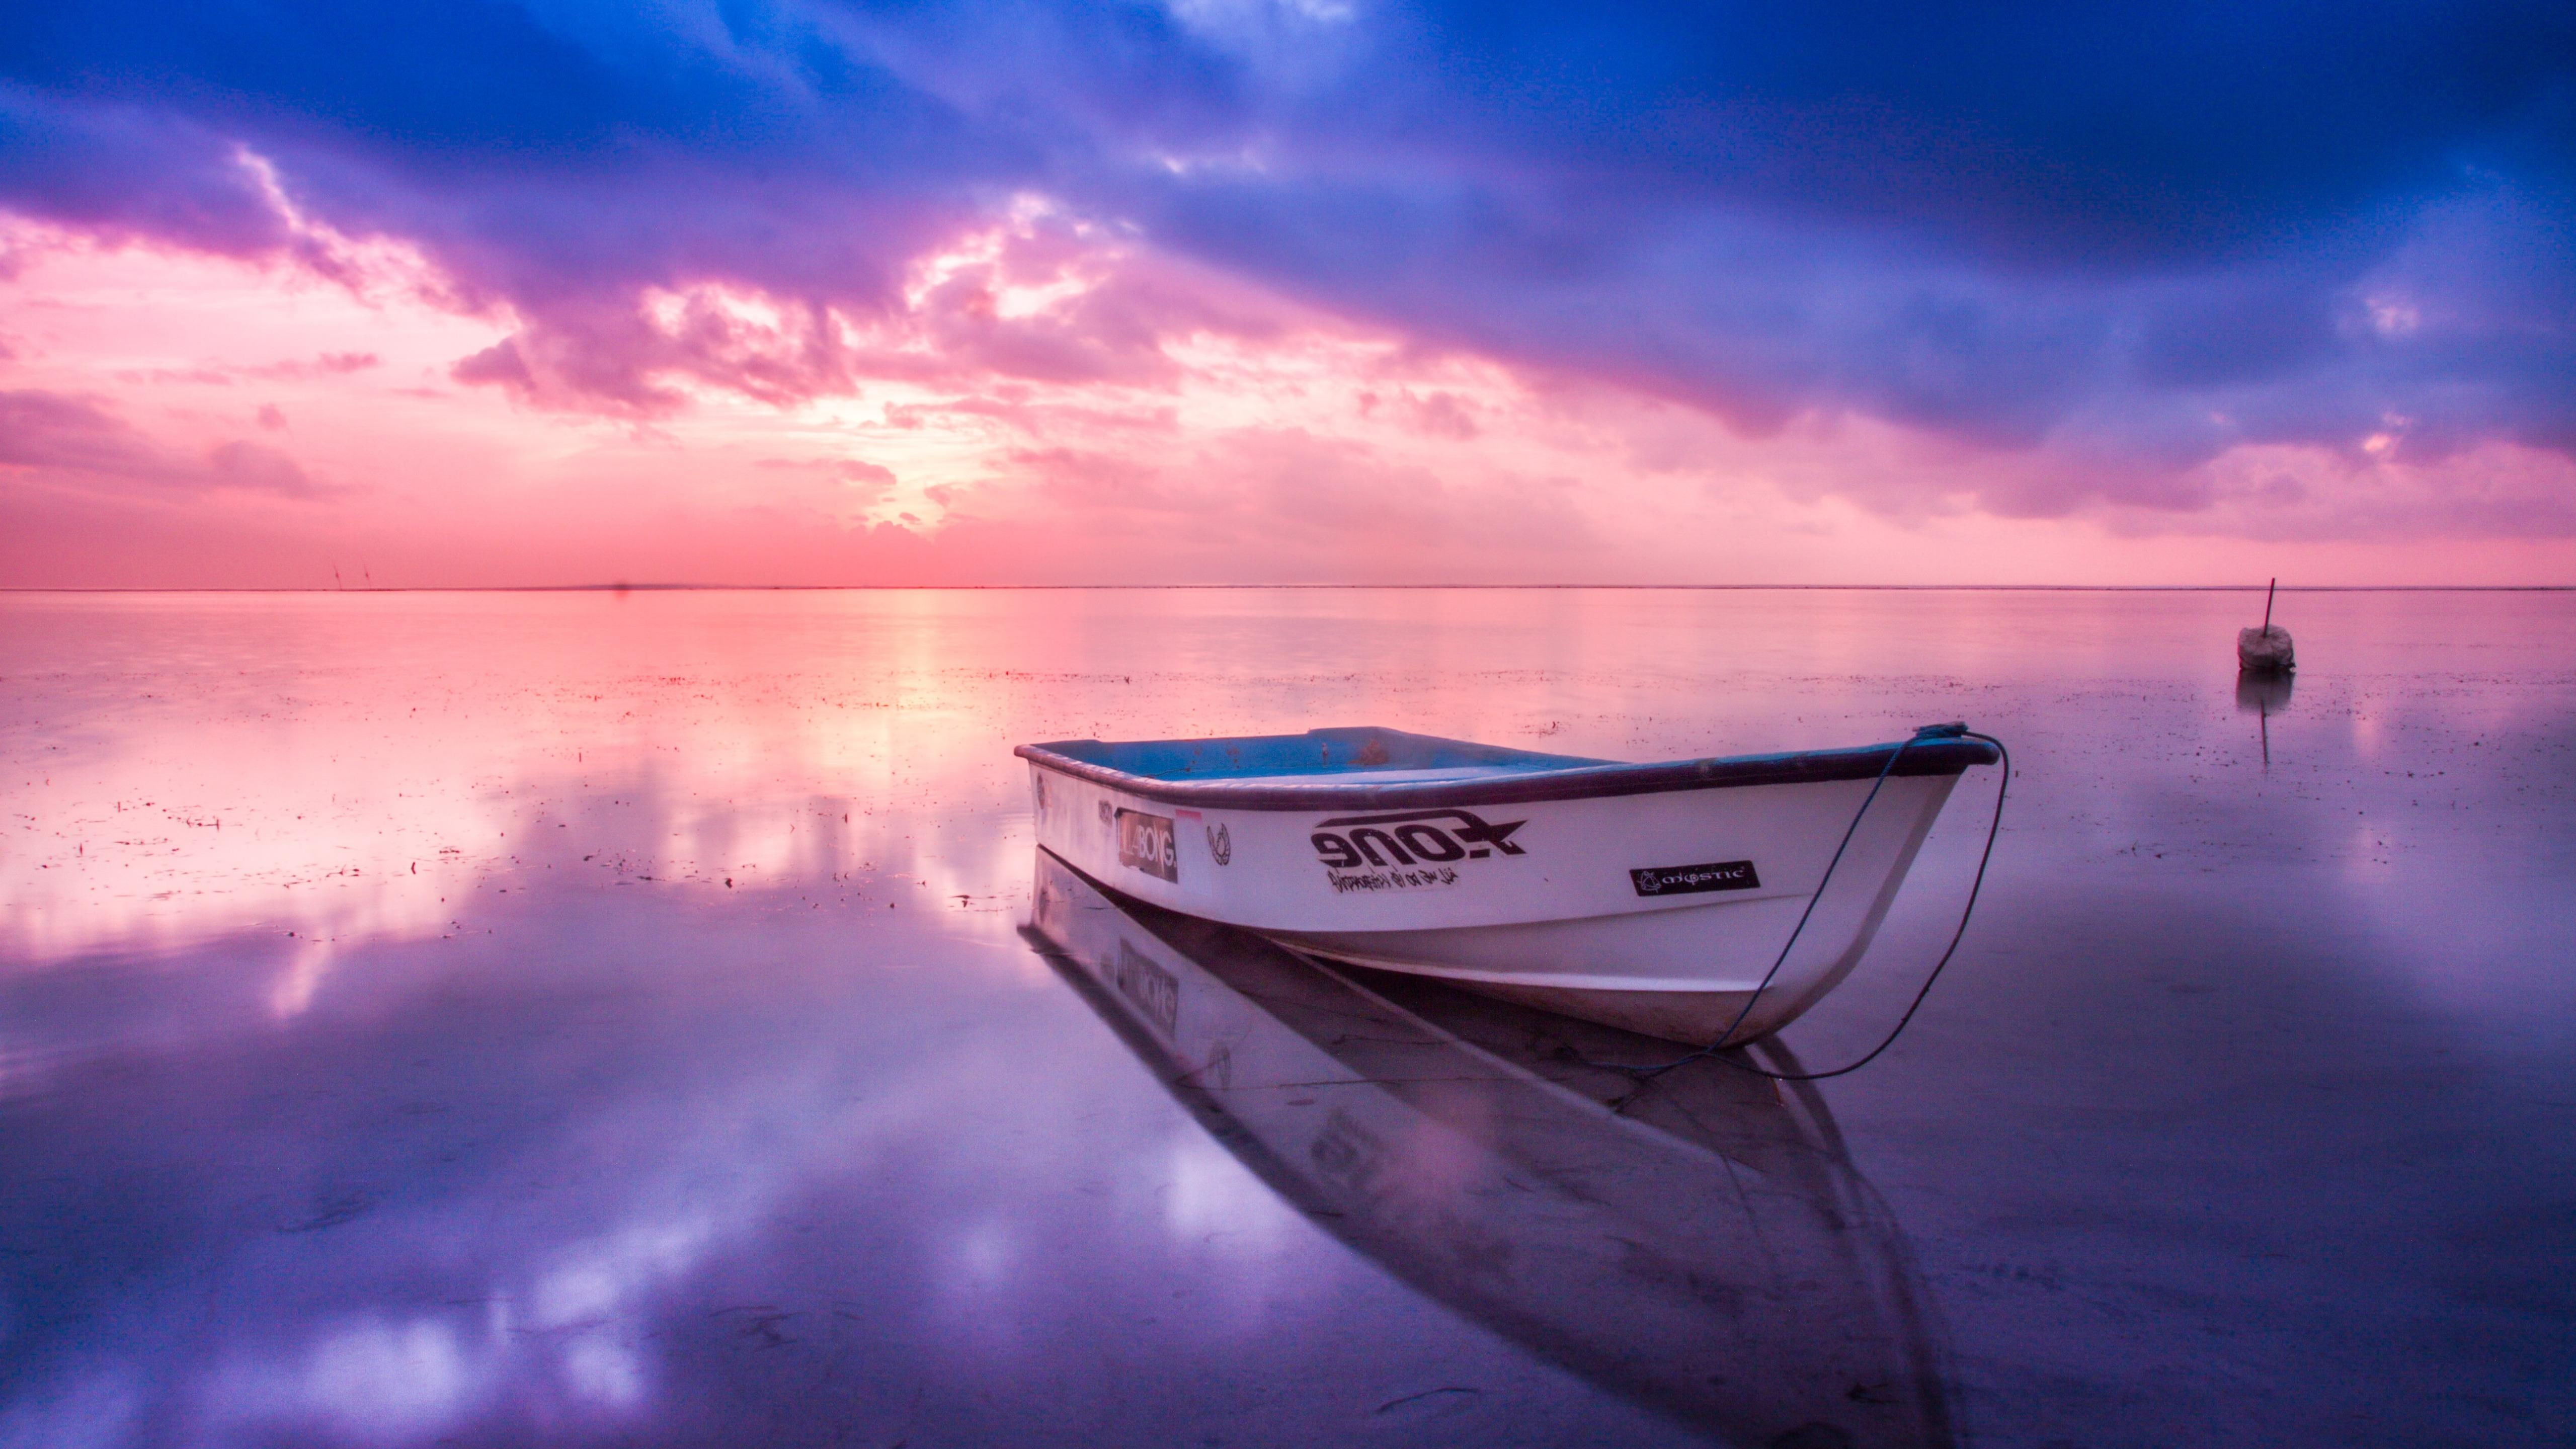 purple, reflection, boat, white boat, pink sky, cloudy, reflected